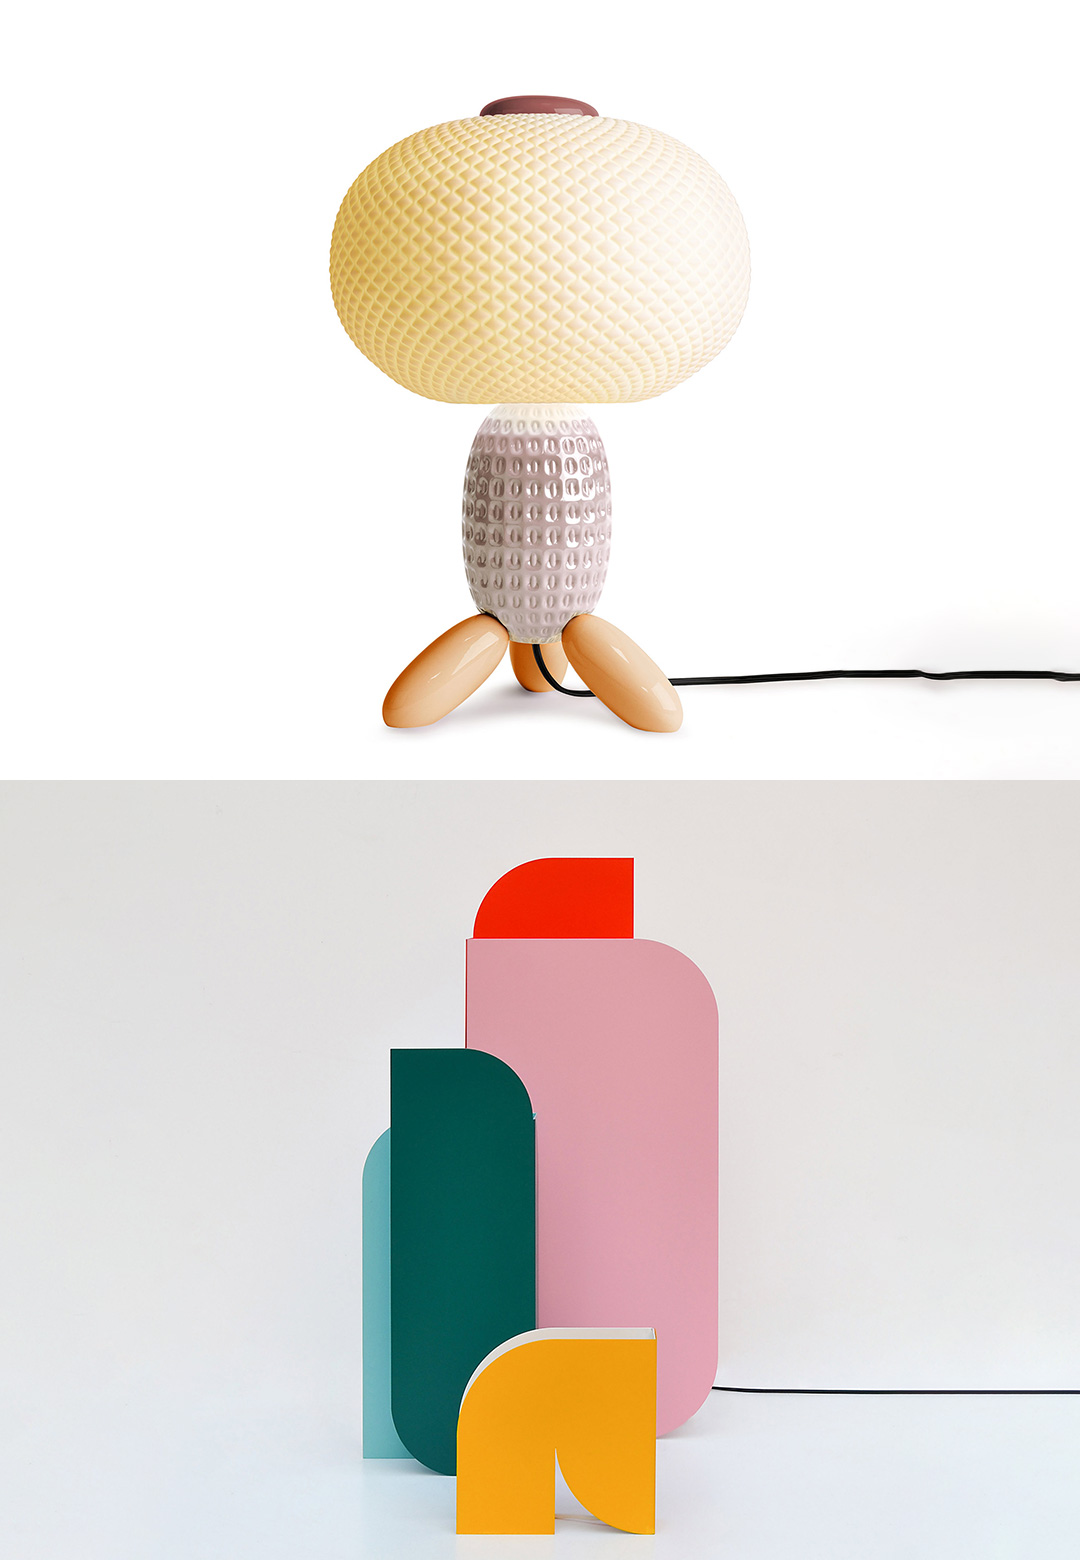 Ten table lamps that shine a light on form, materiality and technique in lighting design